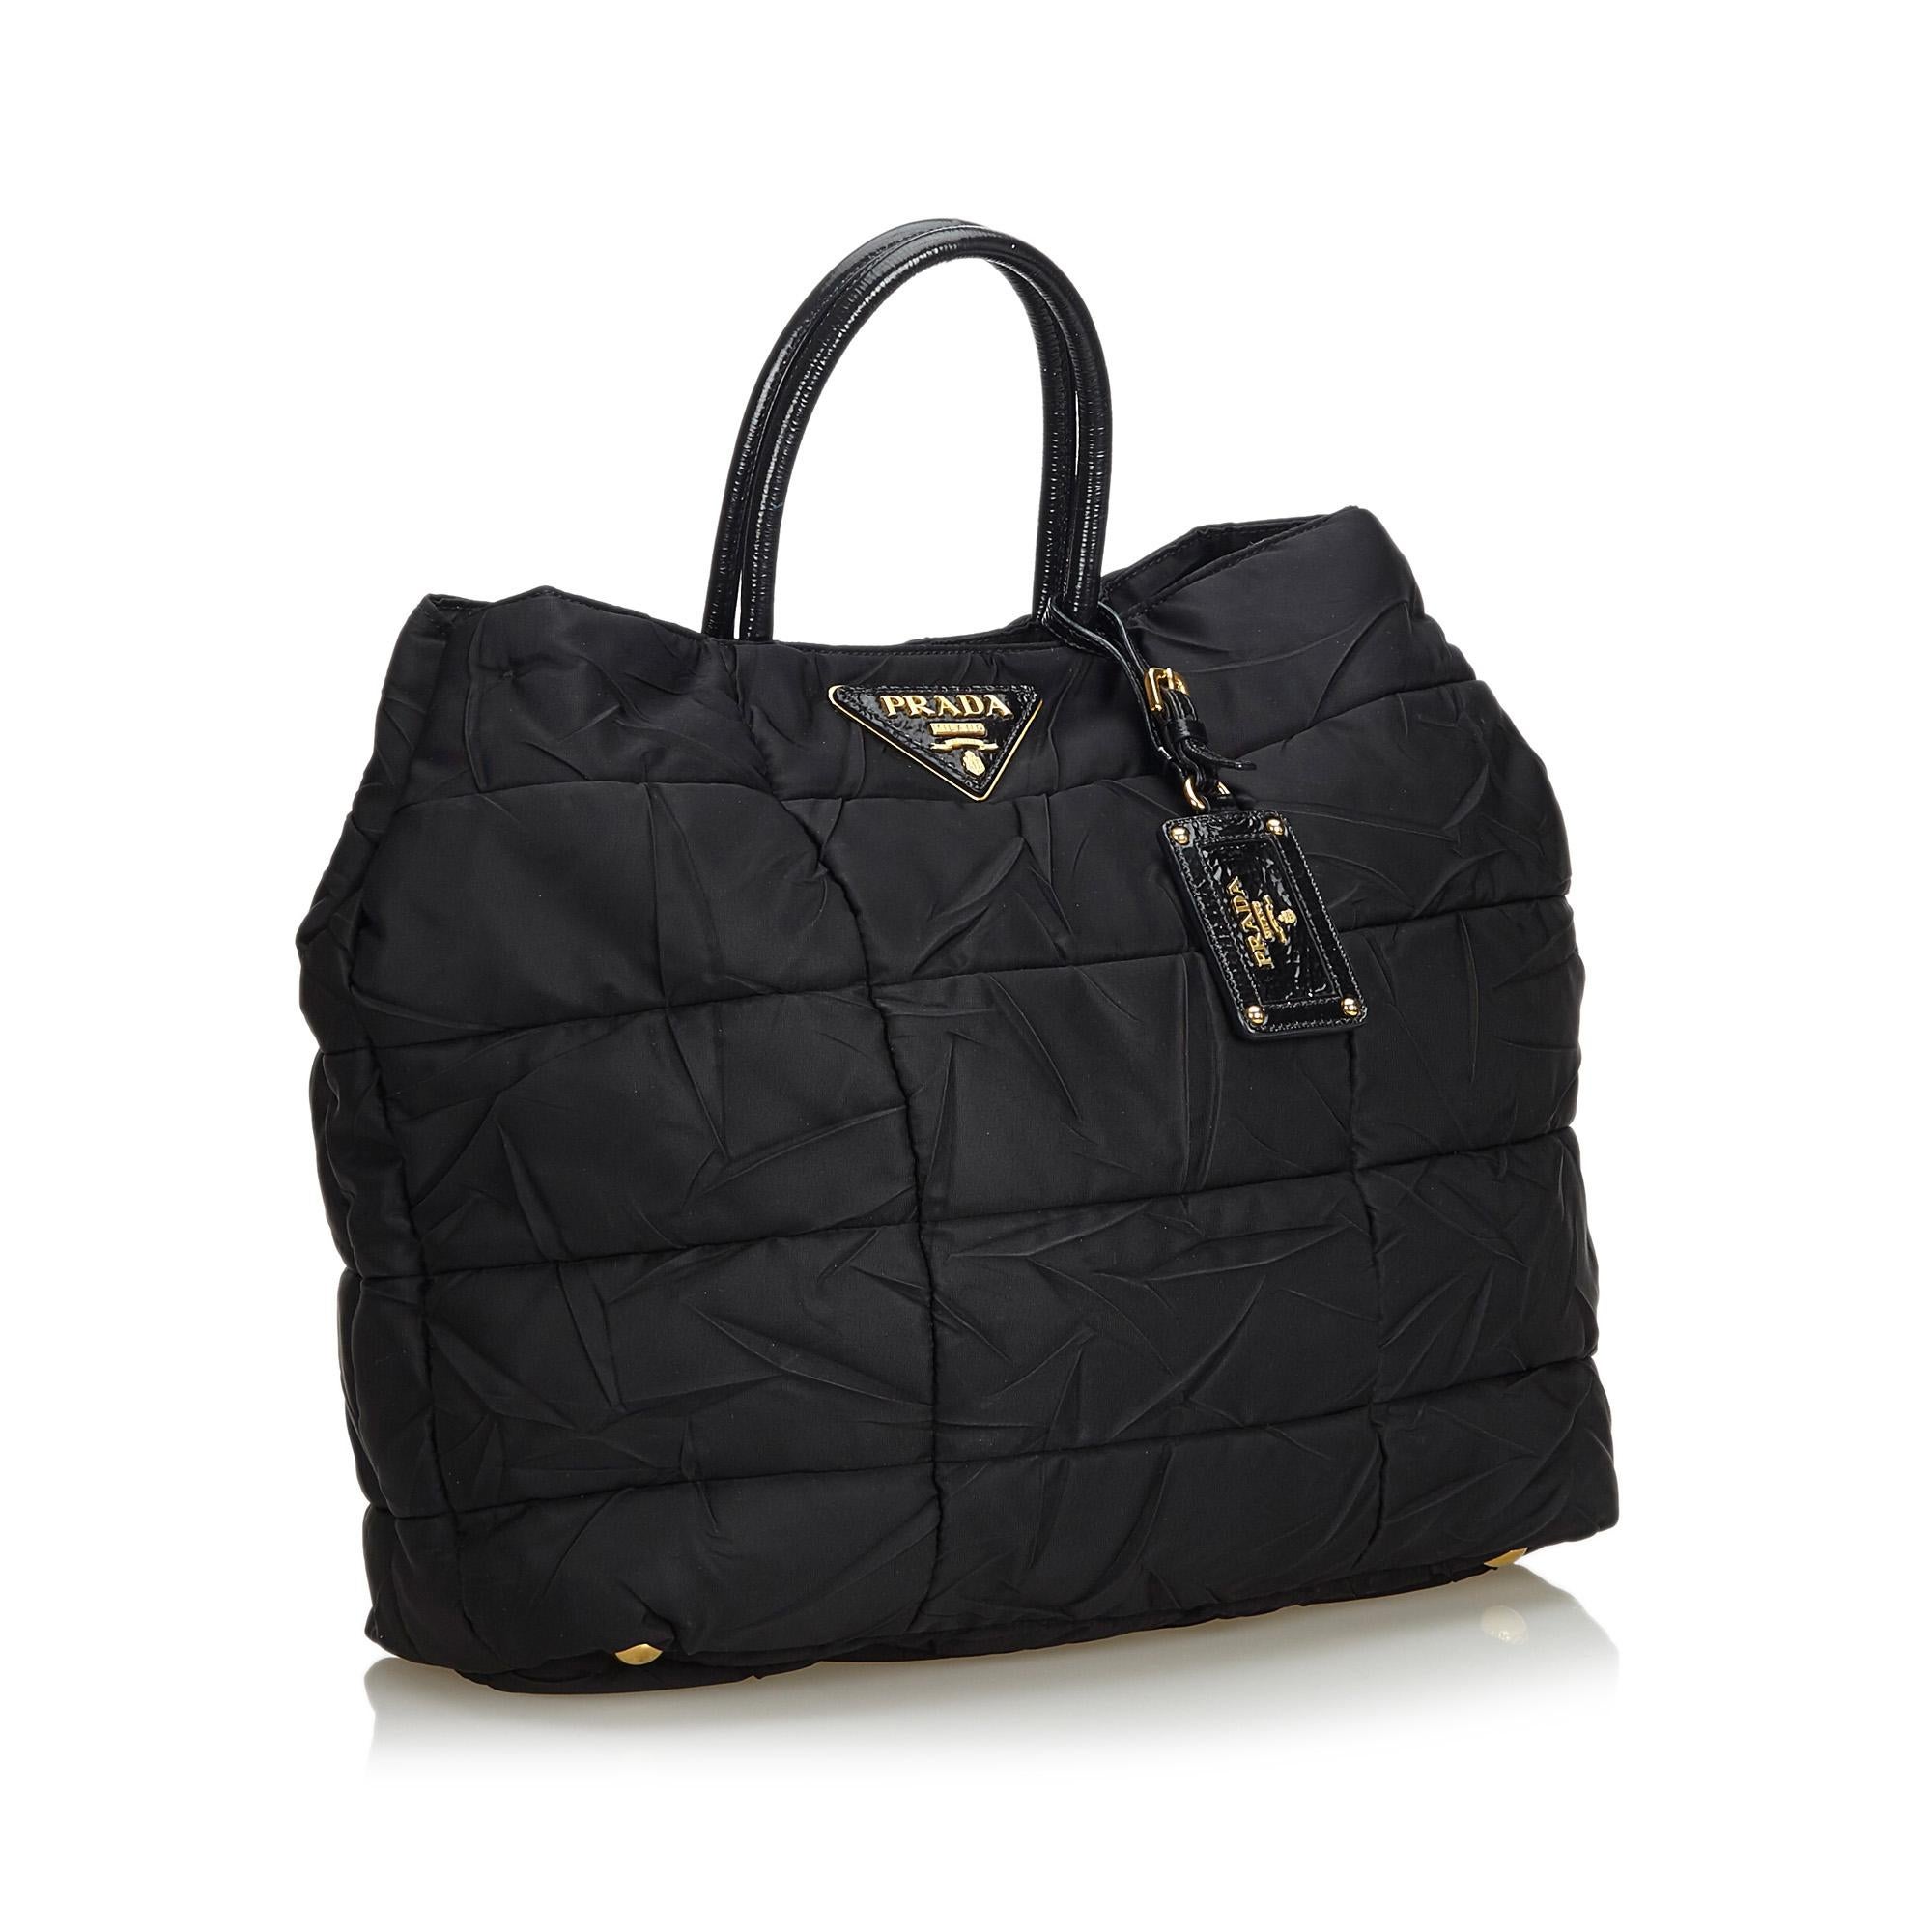 This tote bag features a quilted nylon body, rolled leather handles, an open top with a magnetic closure, and interior an interior zip pocket. It carries as B+ condition rating.

Inclusions: 
This item does not come with